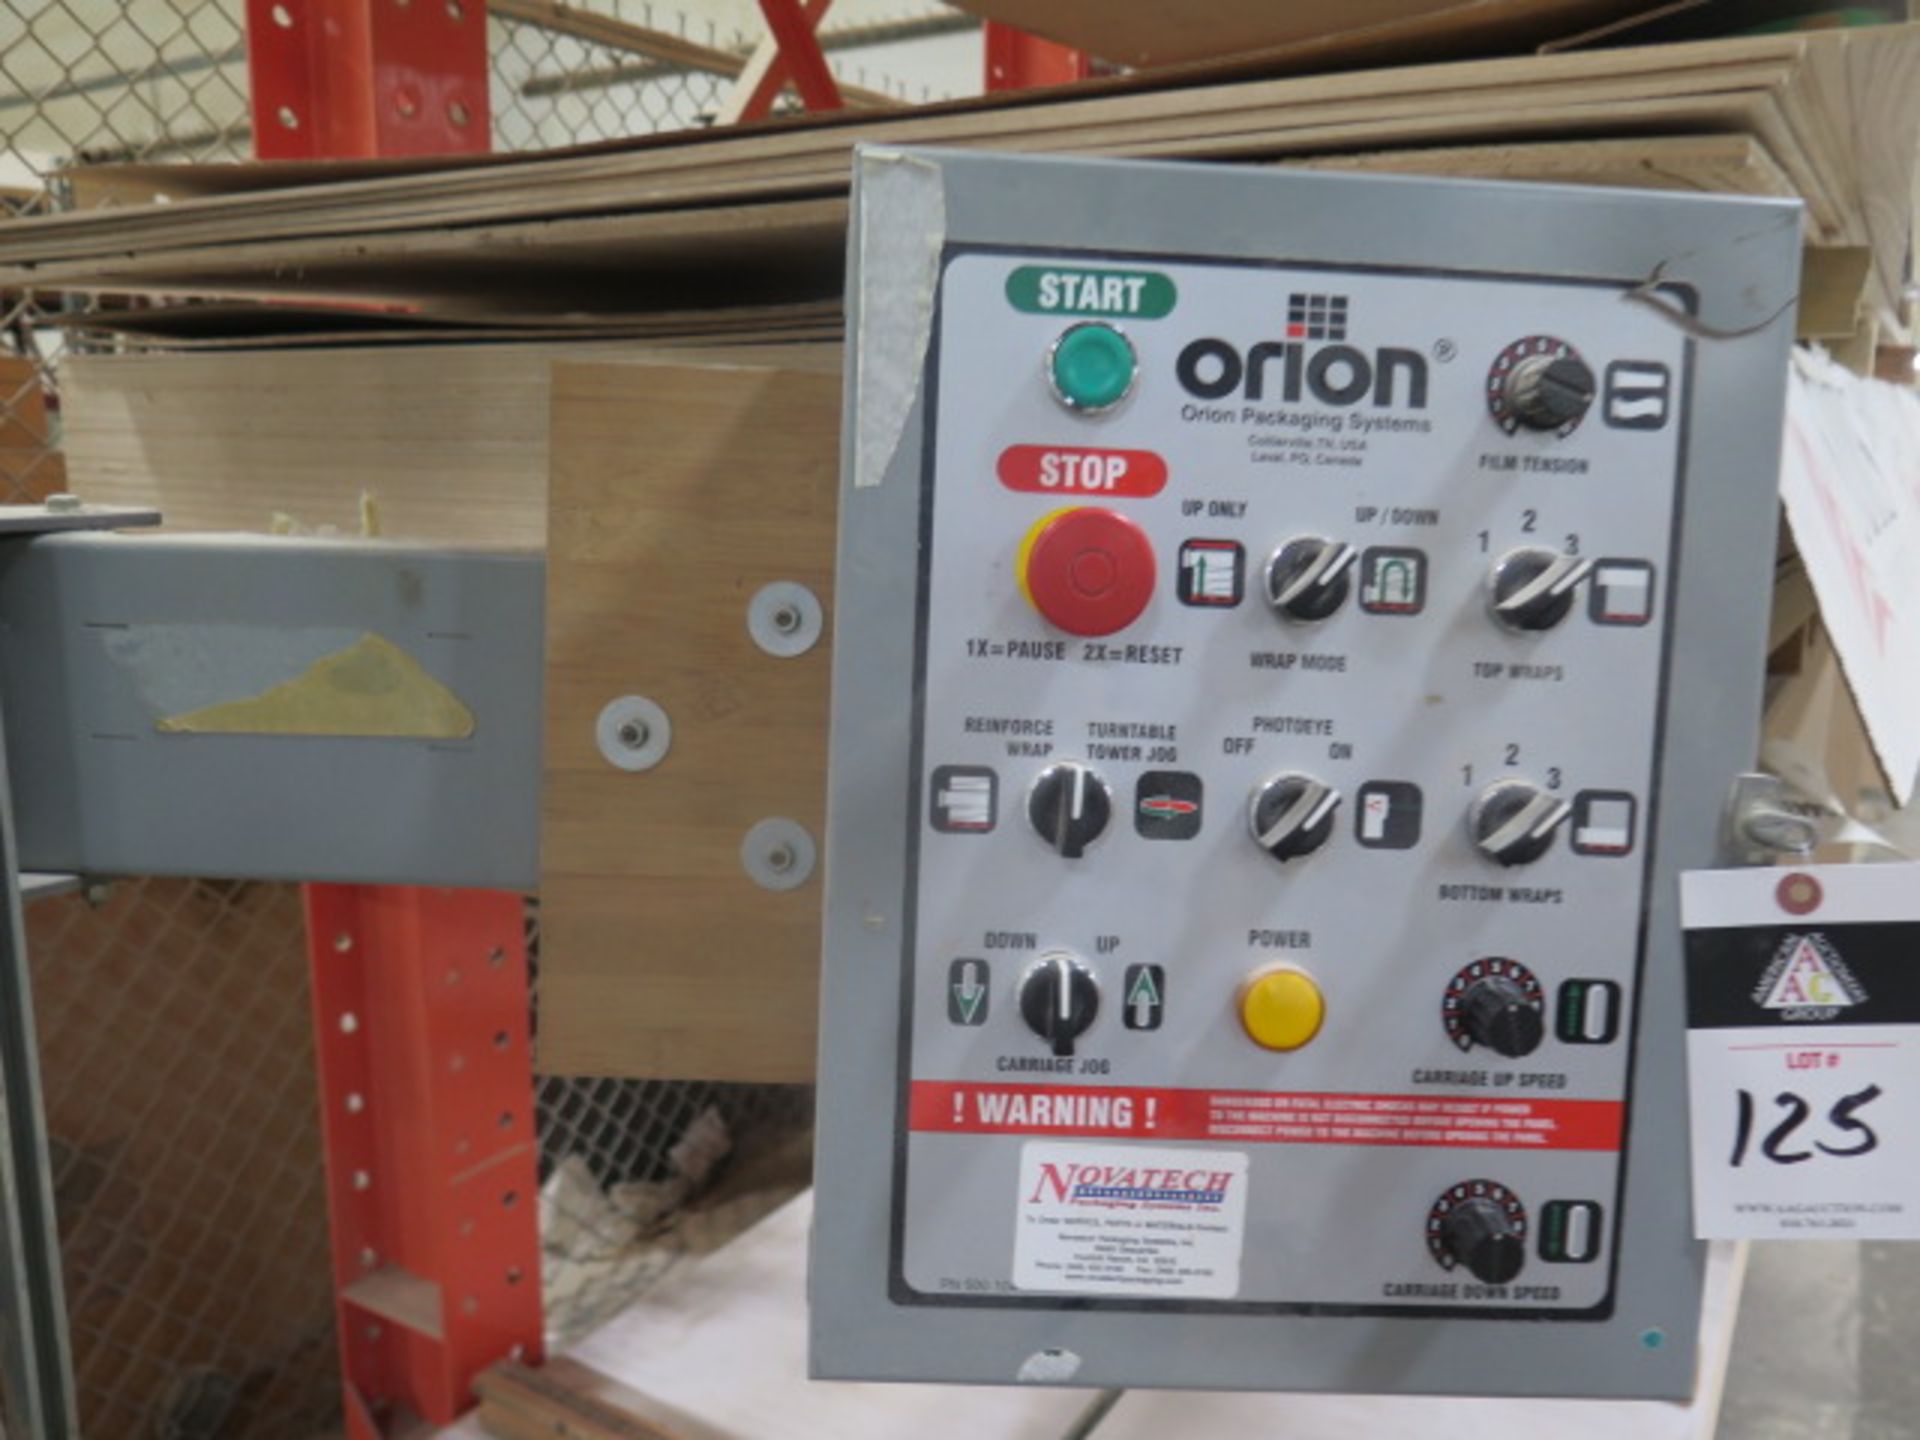 2006 Orion L55/17S Semi-Automatic Pallet Wrapper s/n 2006-0916942 (SOLD AS-IS - NO WARRANTY) - Image 7 of 9